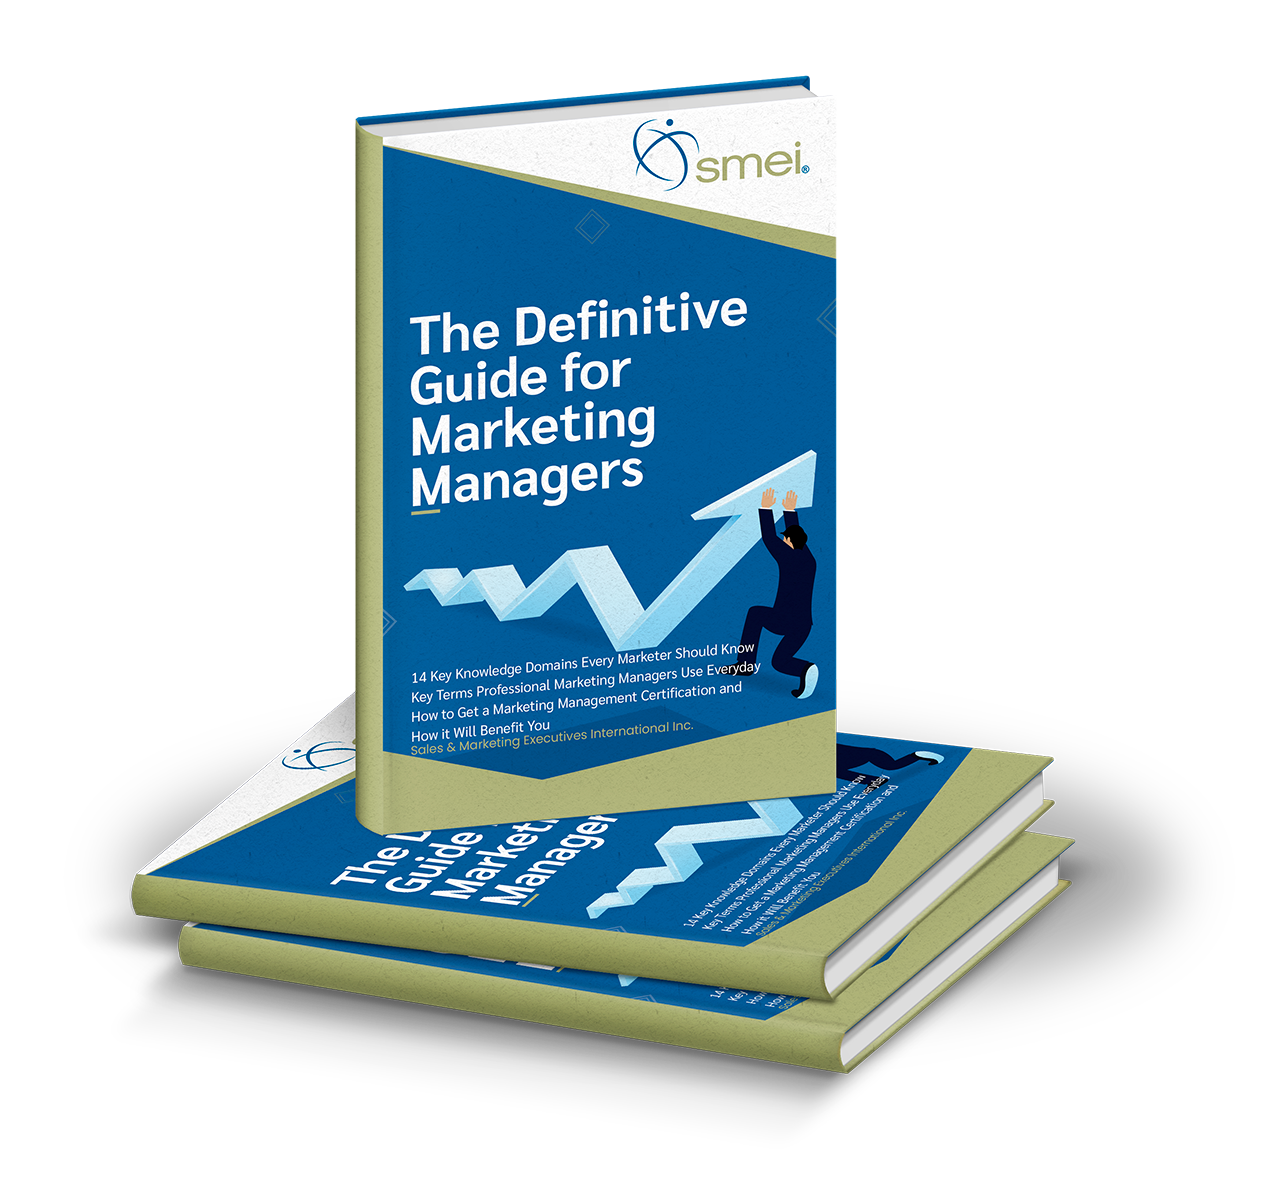 Content Marketing: The Complete Guide To Generating Profit From Your Online Content